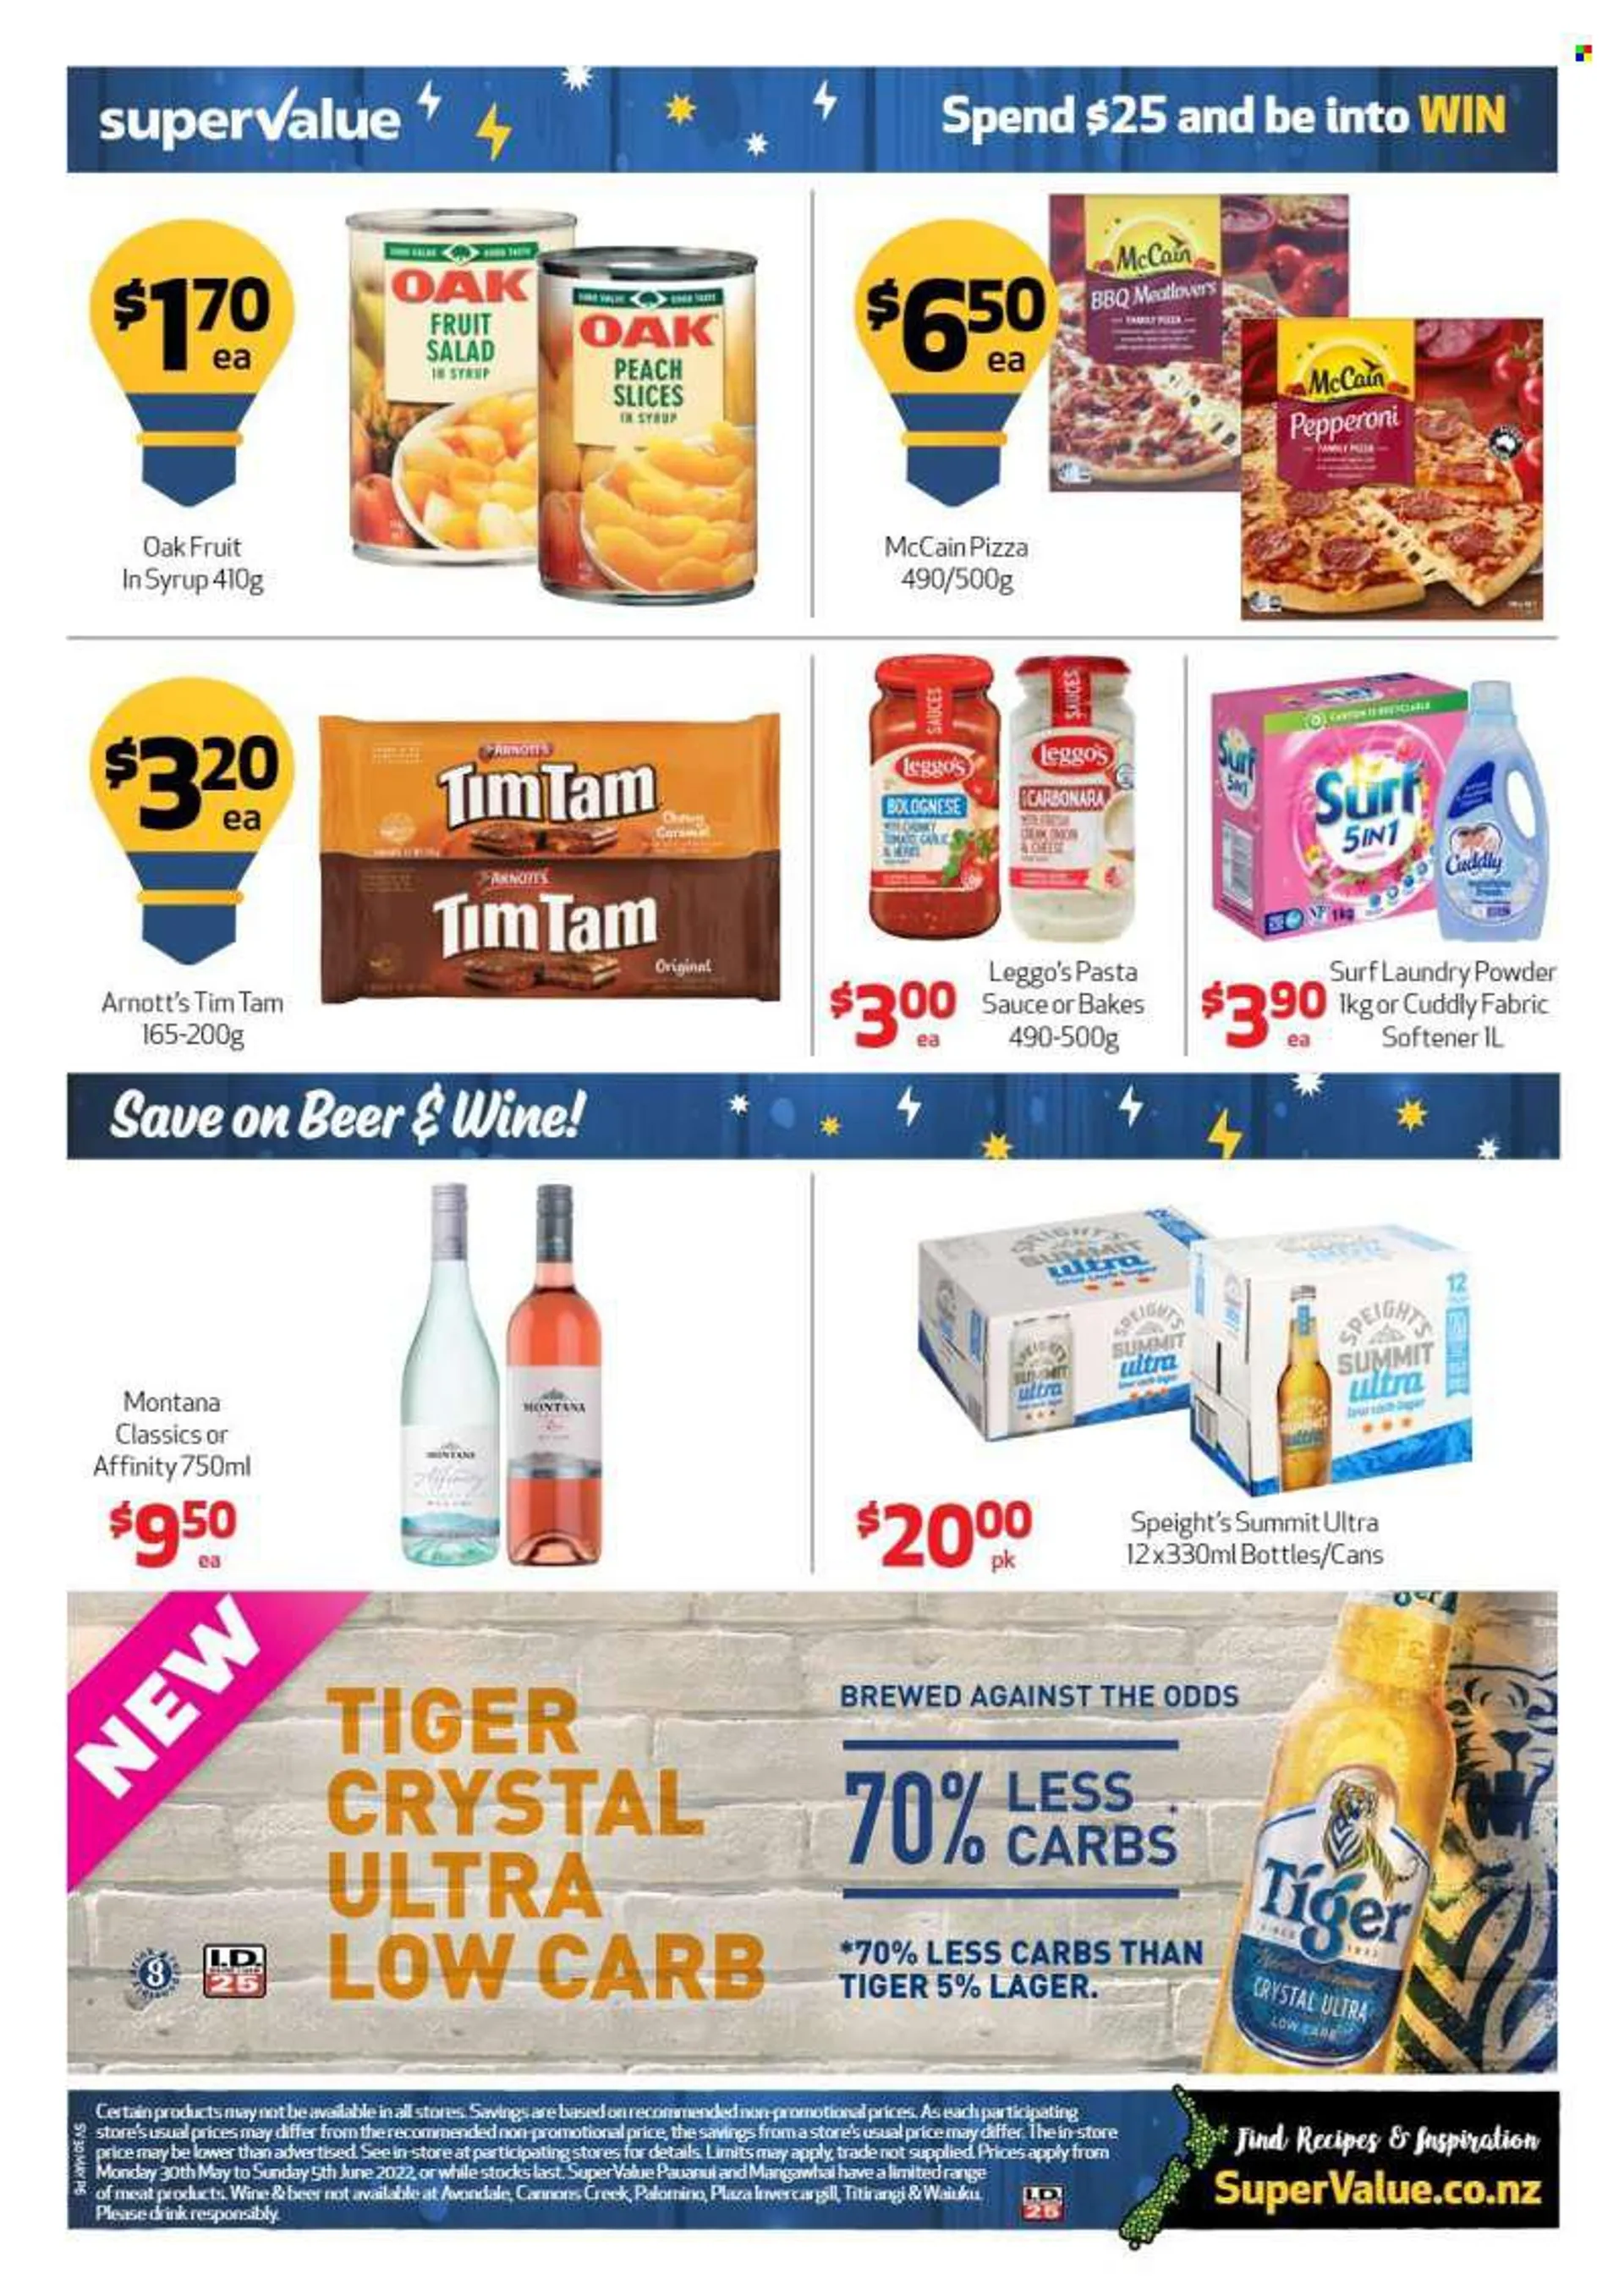 SuperValue mailer - 30.05.2022 - 05.06.2022. - 30 May 5 June 2022 - Page 6